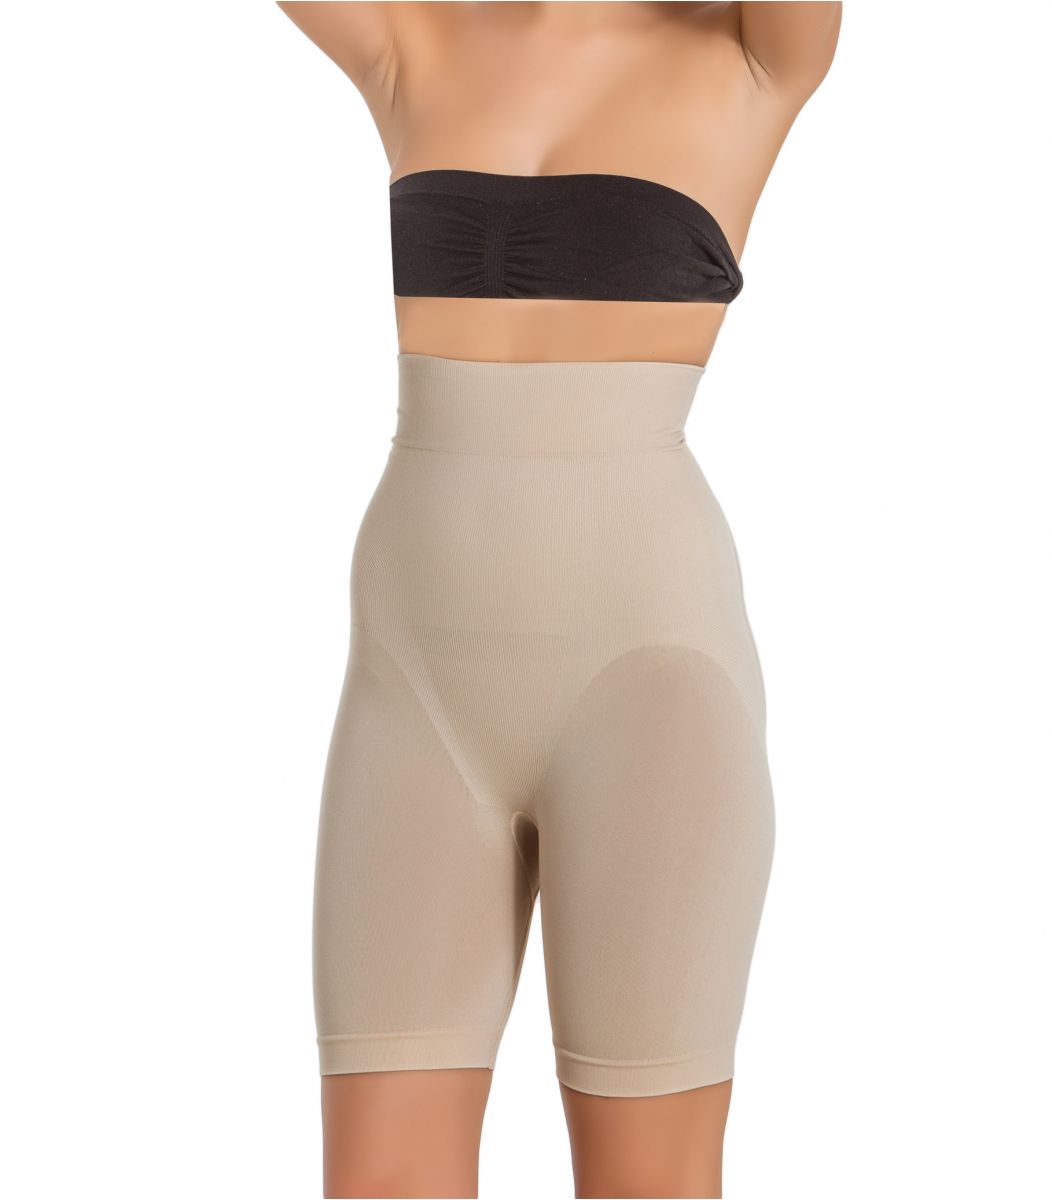  Boxer Lord Γυναικείο Boxer Corset ανόρθωσης seamless {PRODUCT_REFERENCE}-1